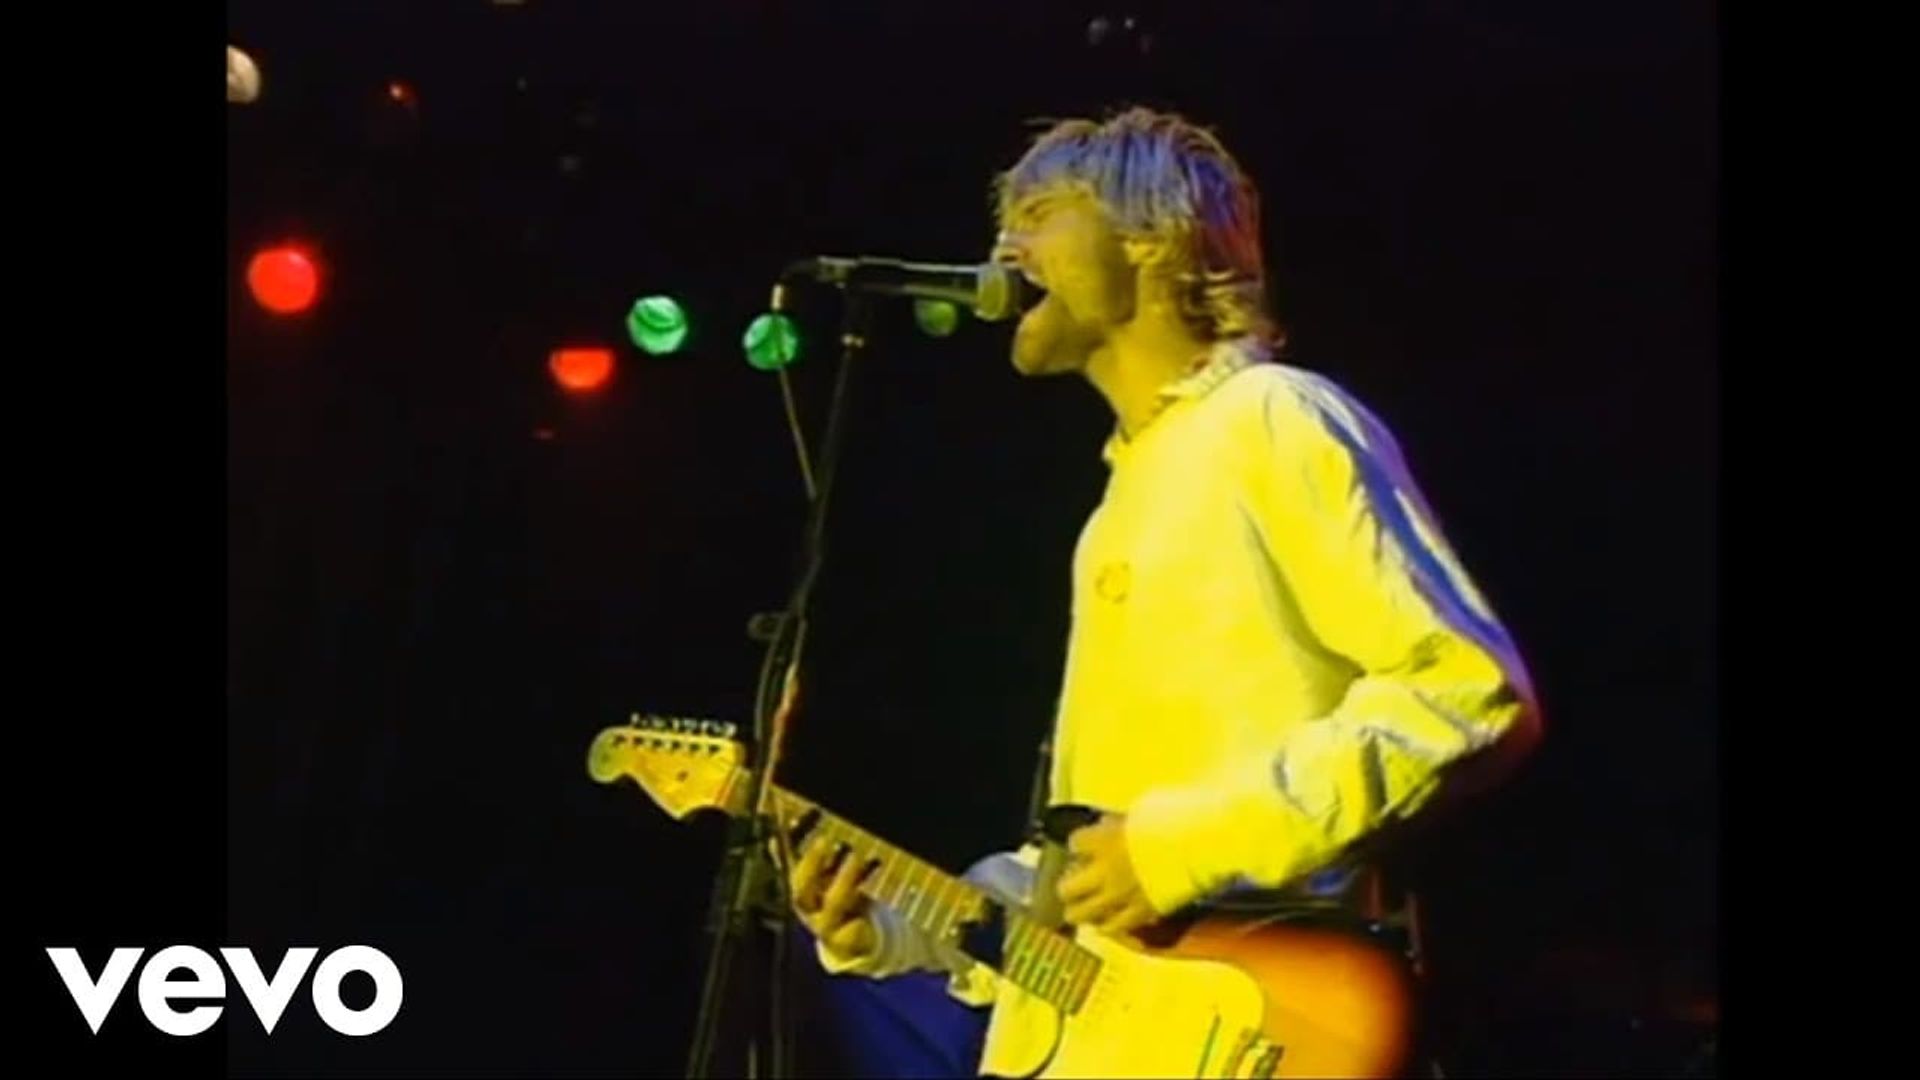 Nirvana: Live at Reading background